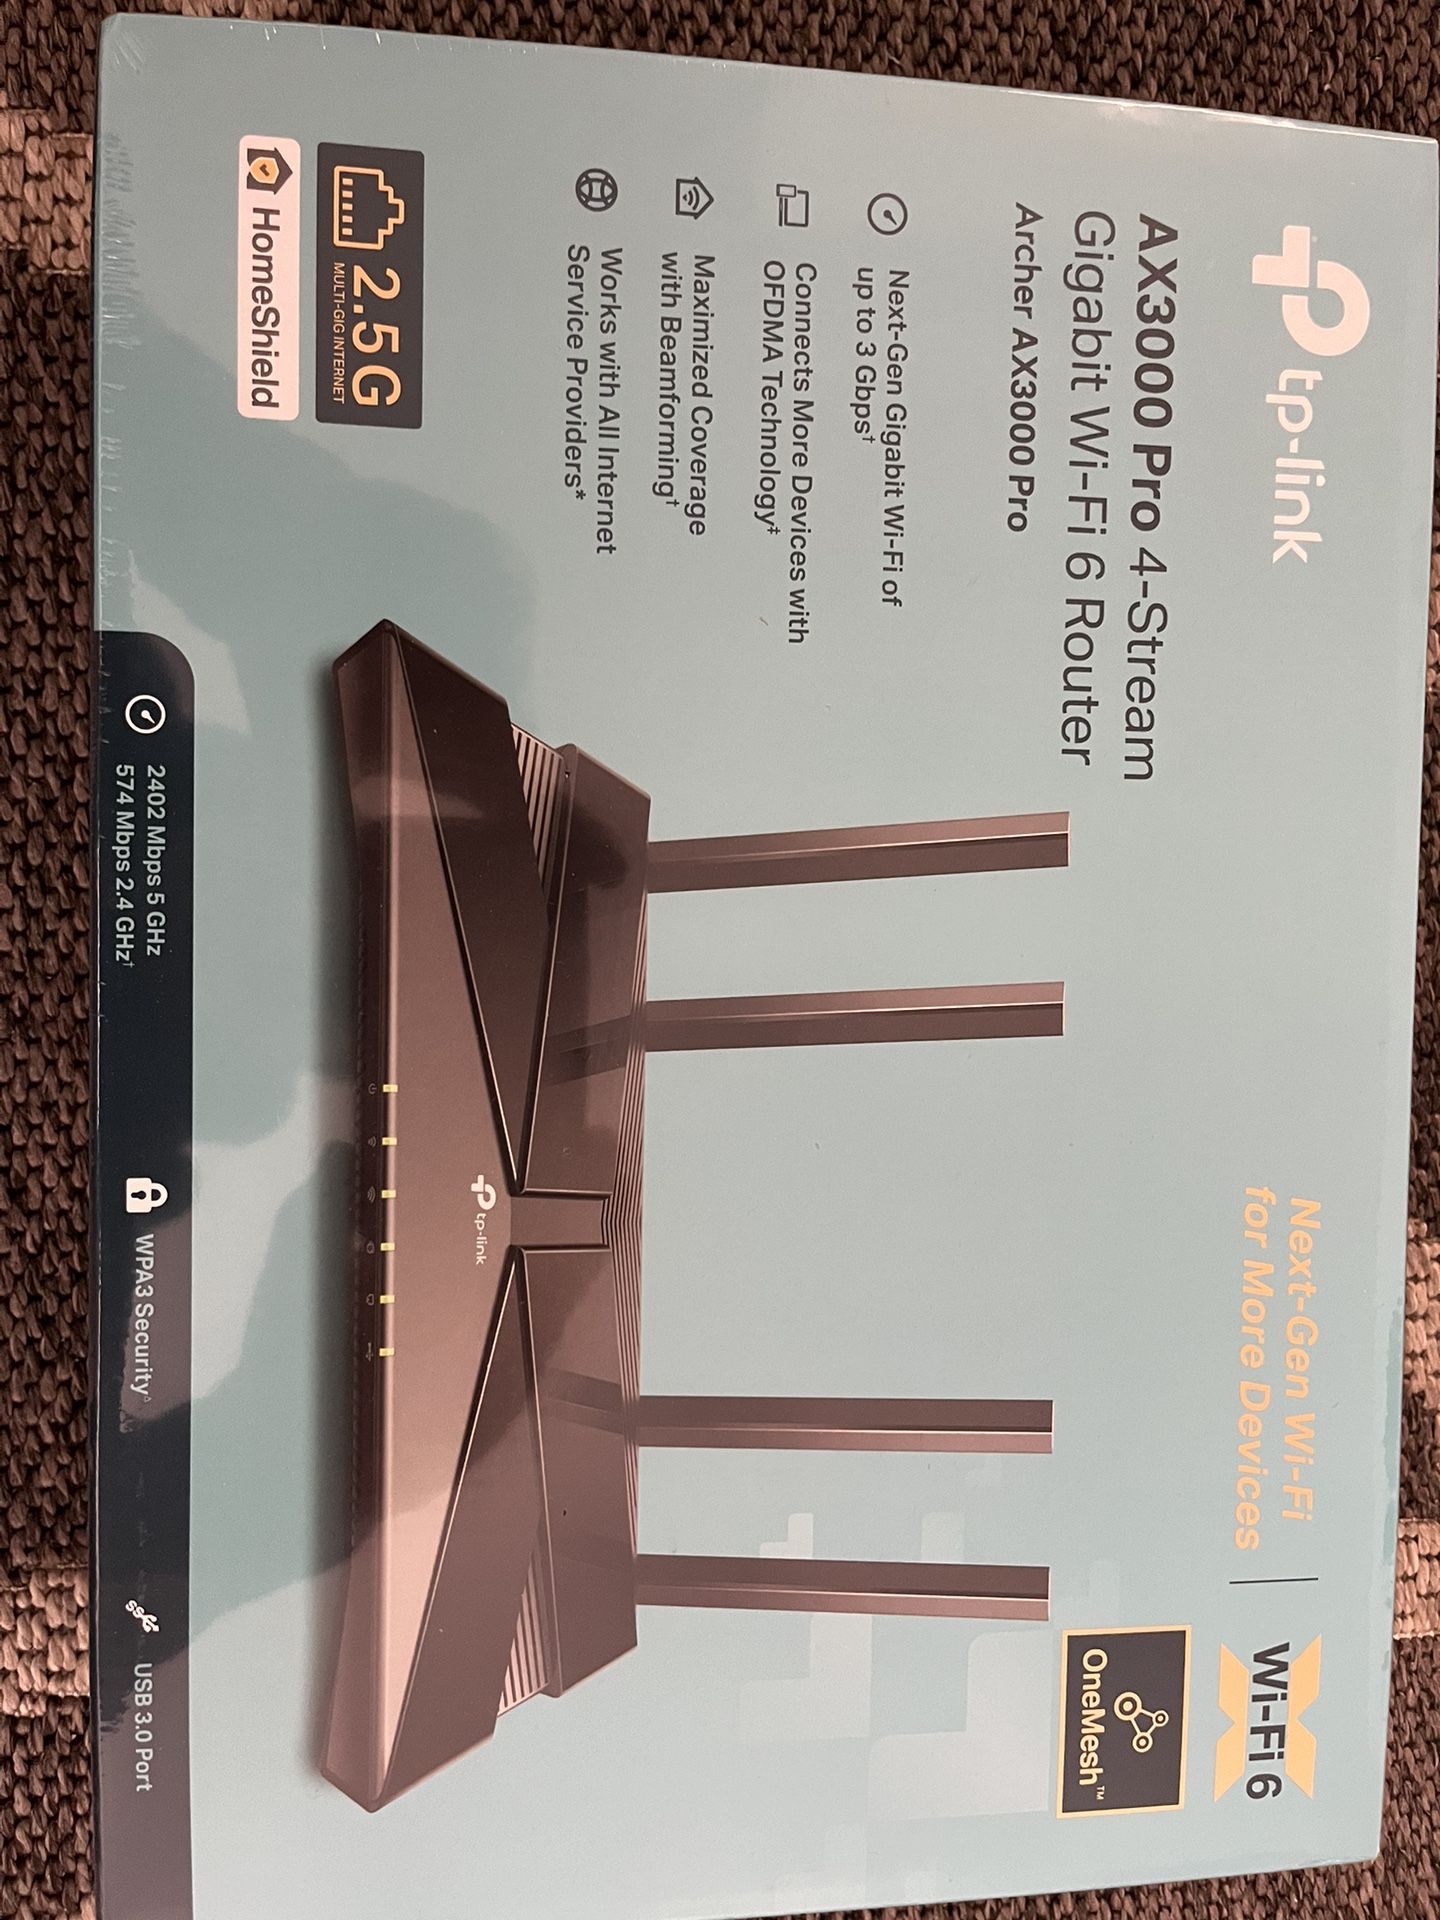 TP Link Wi-Fi Router AX 3000 Pro